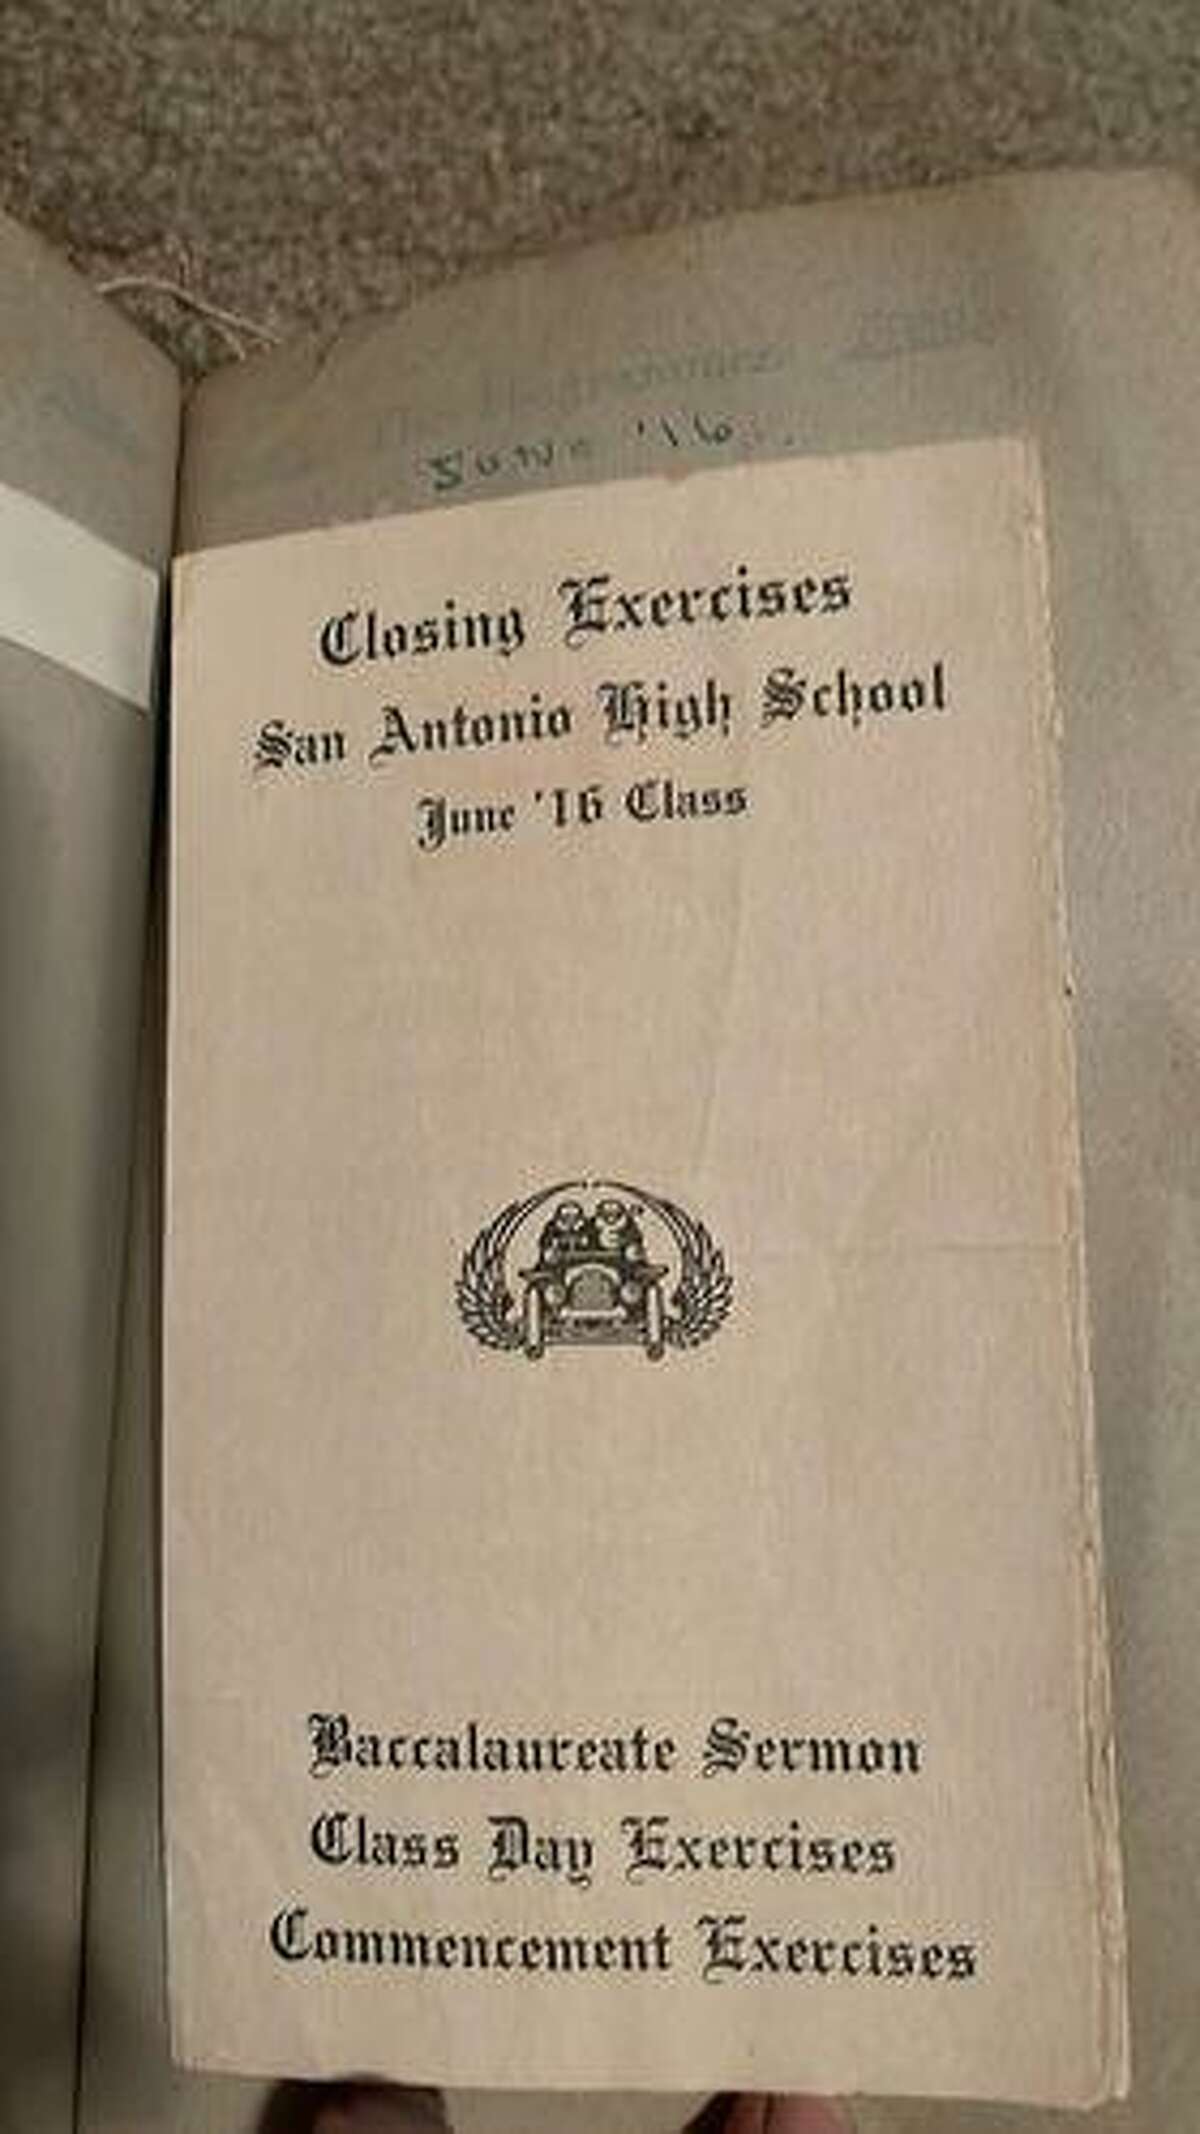 Isabel Wefing saved mementos from her high school years on her diary pages, including the program for the June 1916 commencement exercises of San Antonio High School. She used her education to become a typist for the federal government